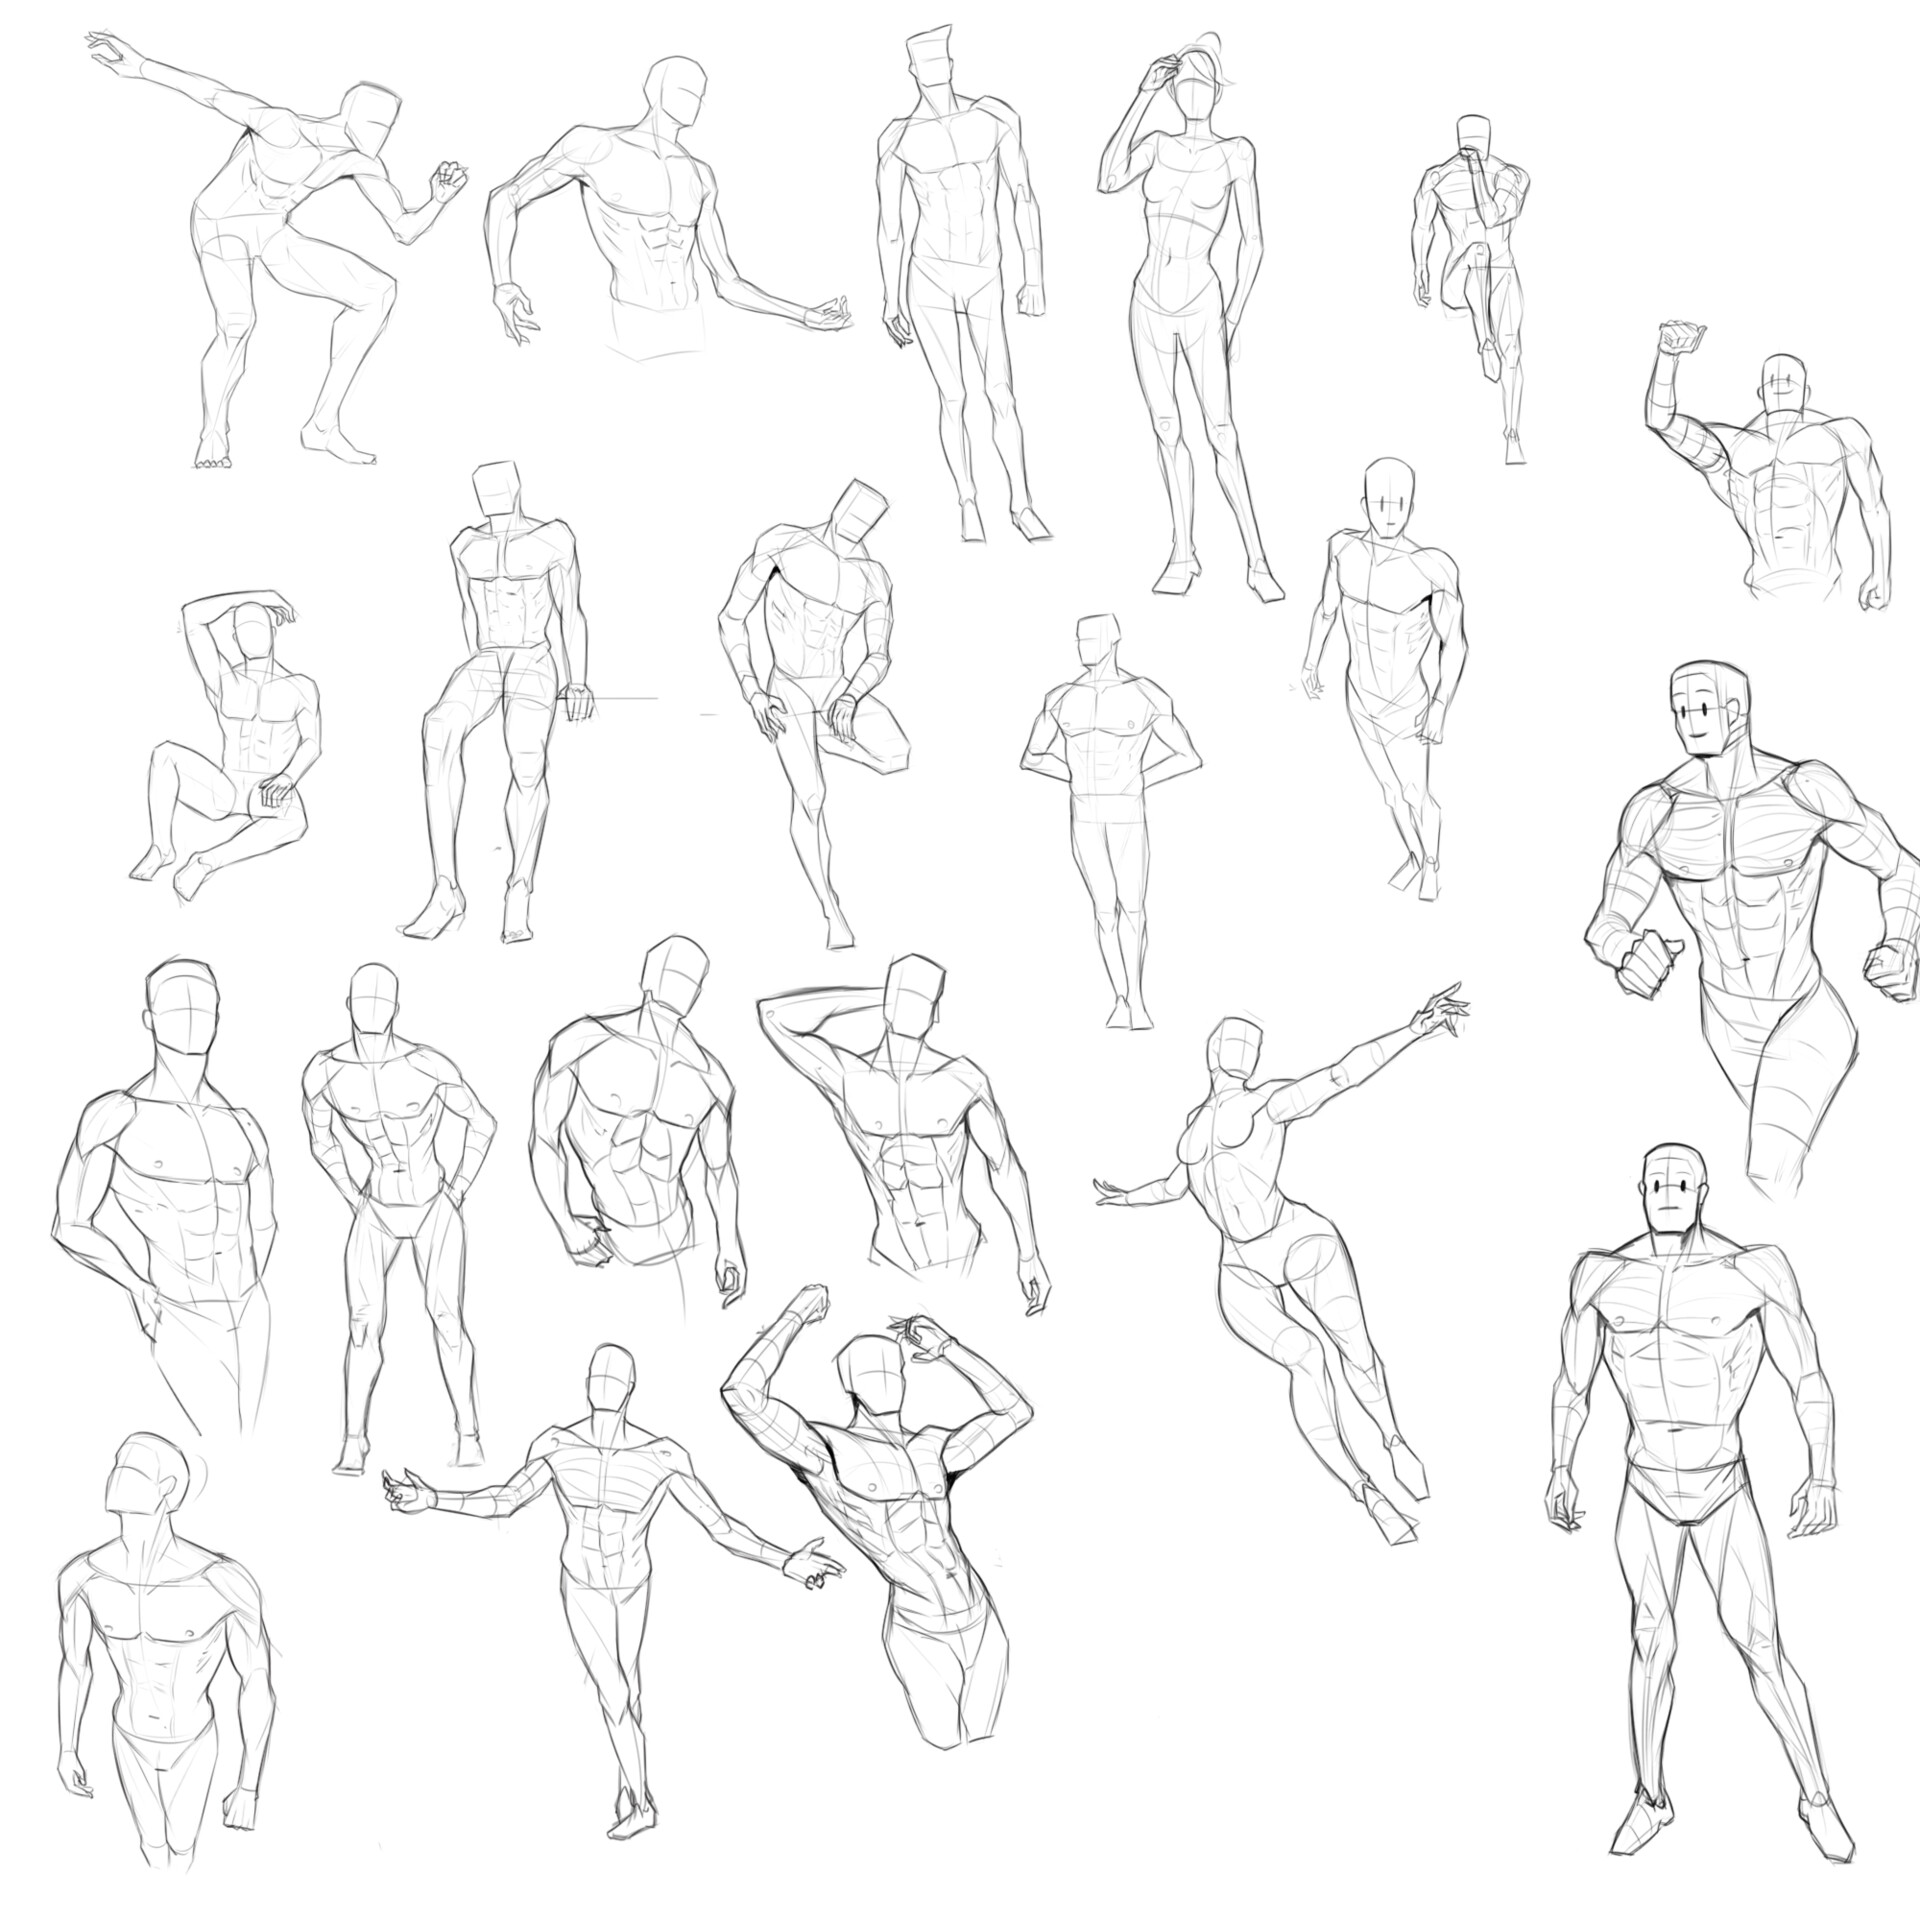 Sketchdump August 2019 [Casual poses] by DamaiMikaz on DeviantArt